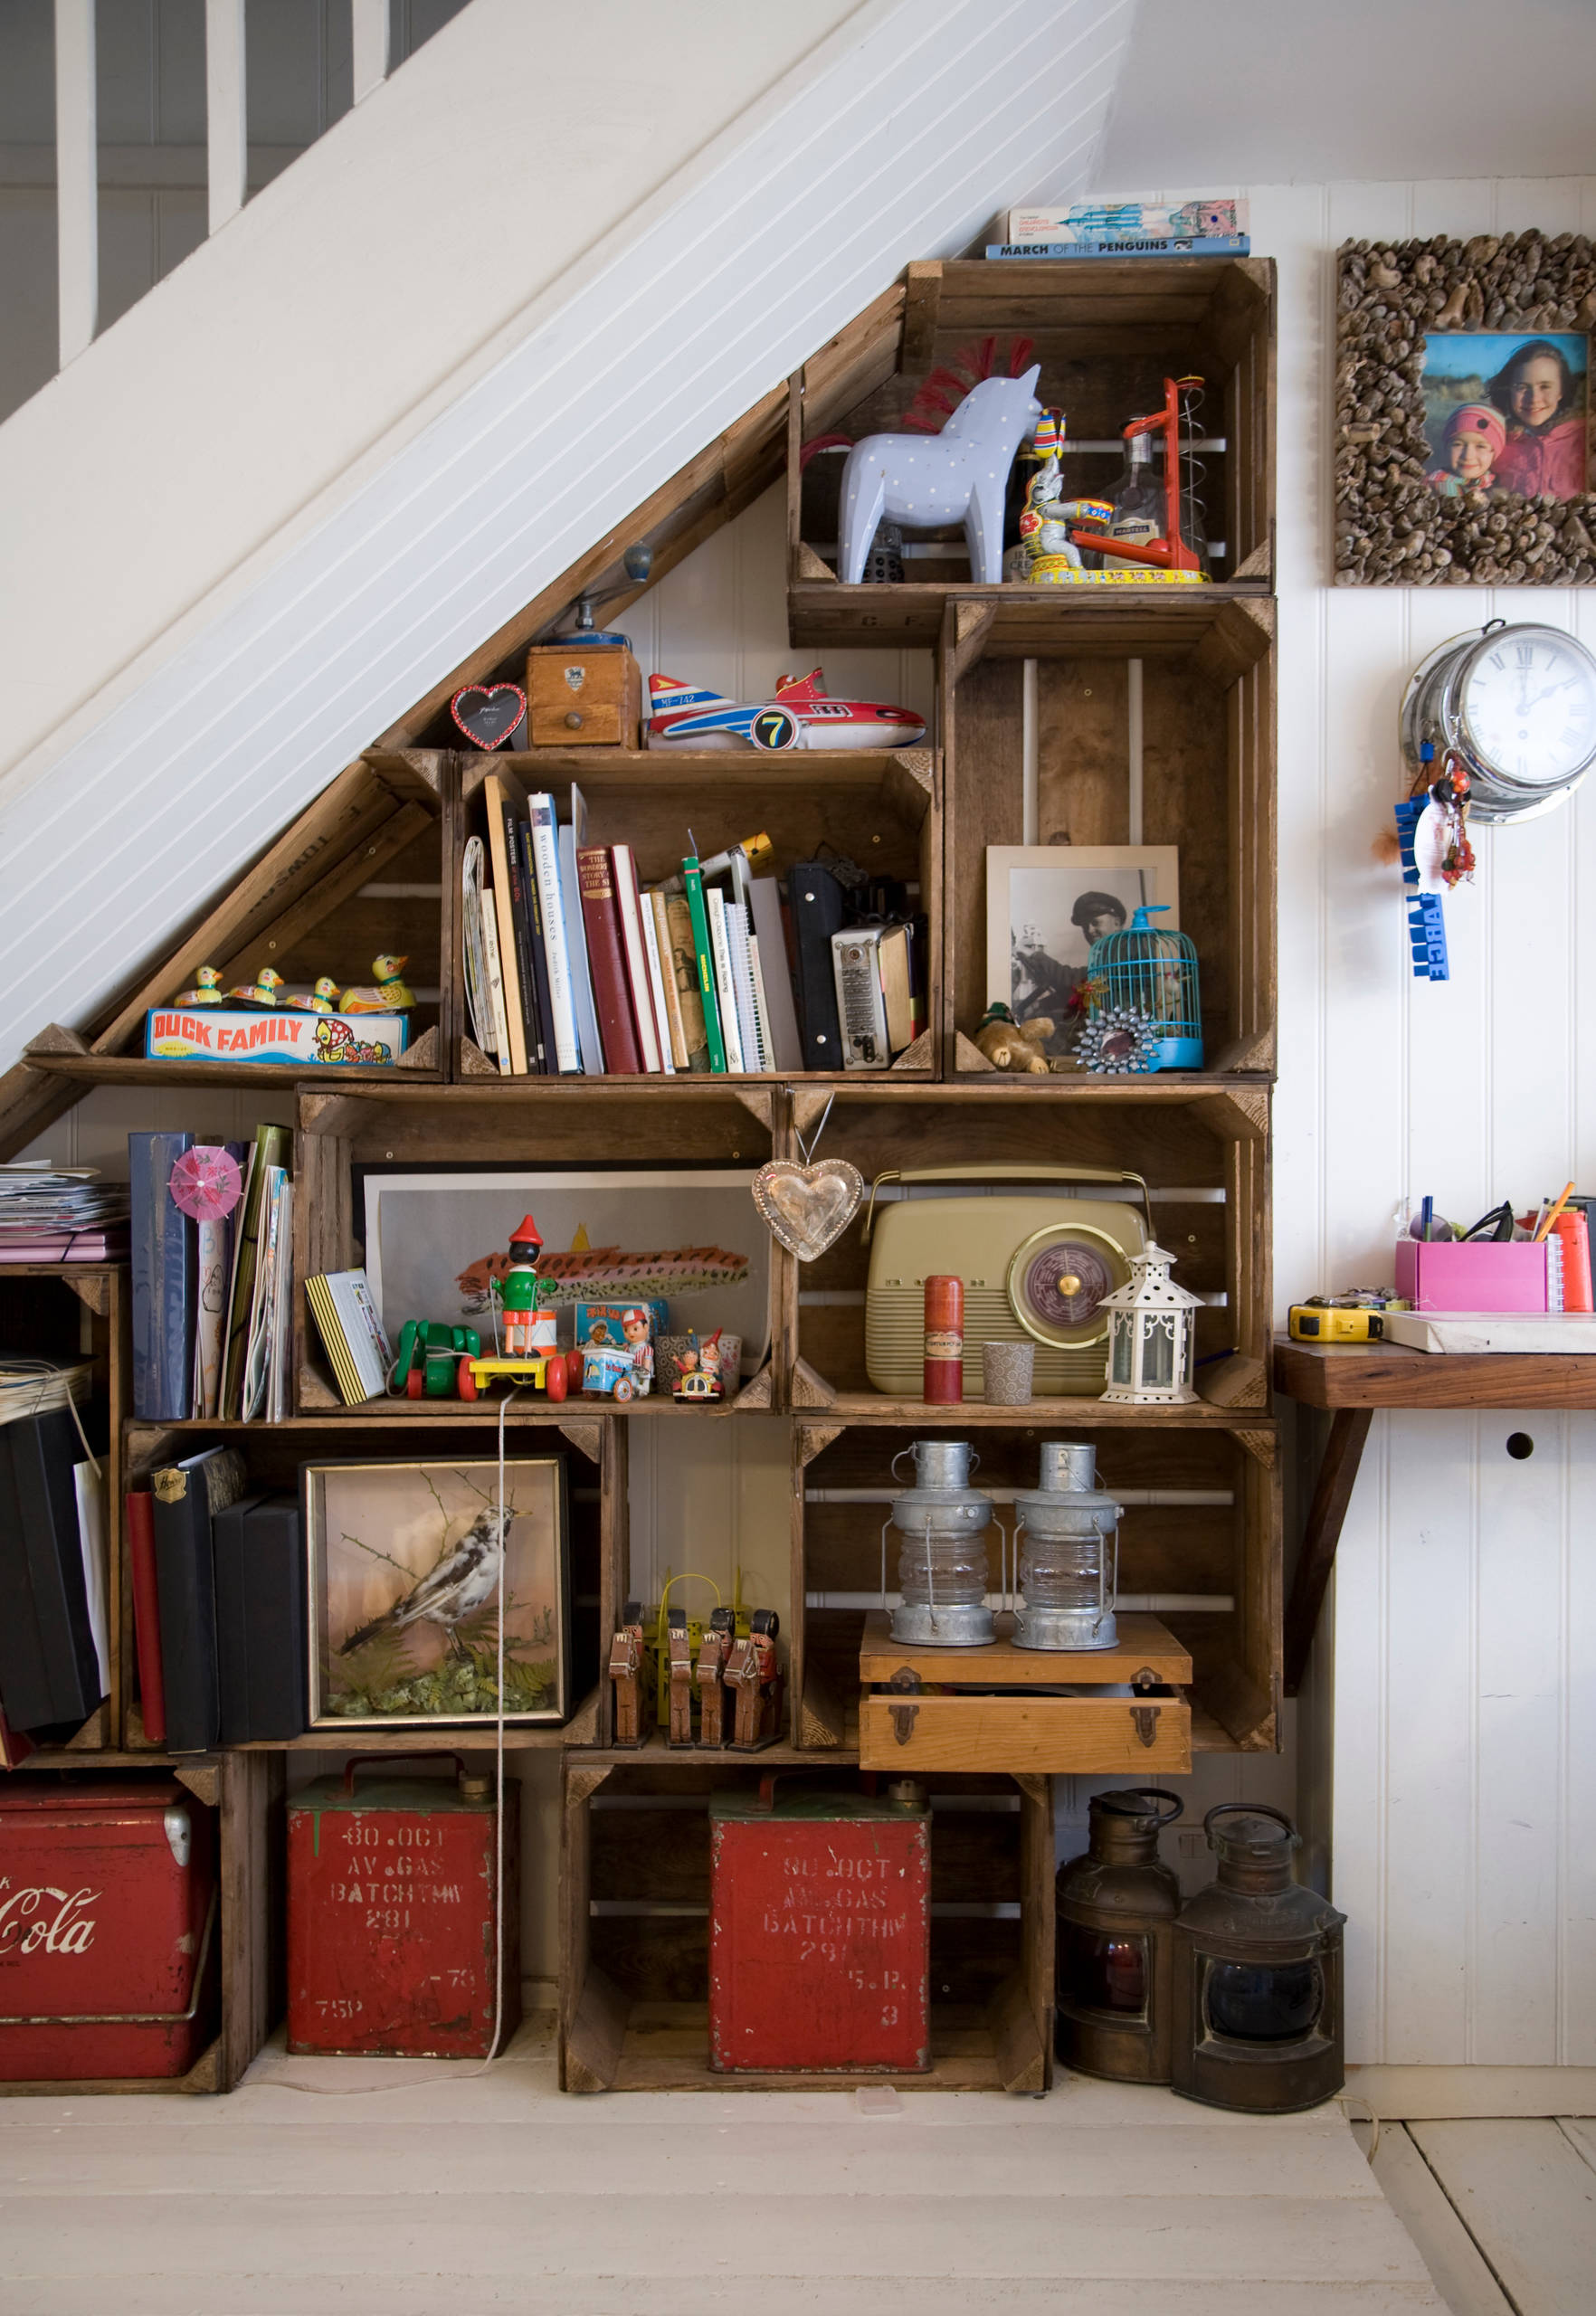 Under stairs storage ideas to maximise the space in your home